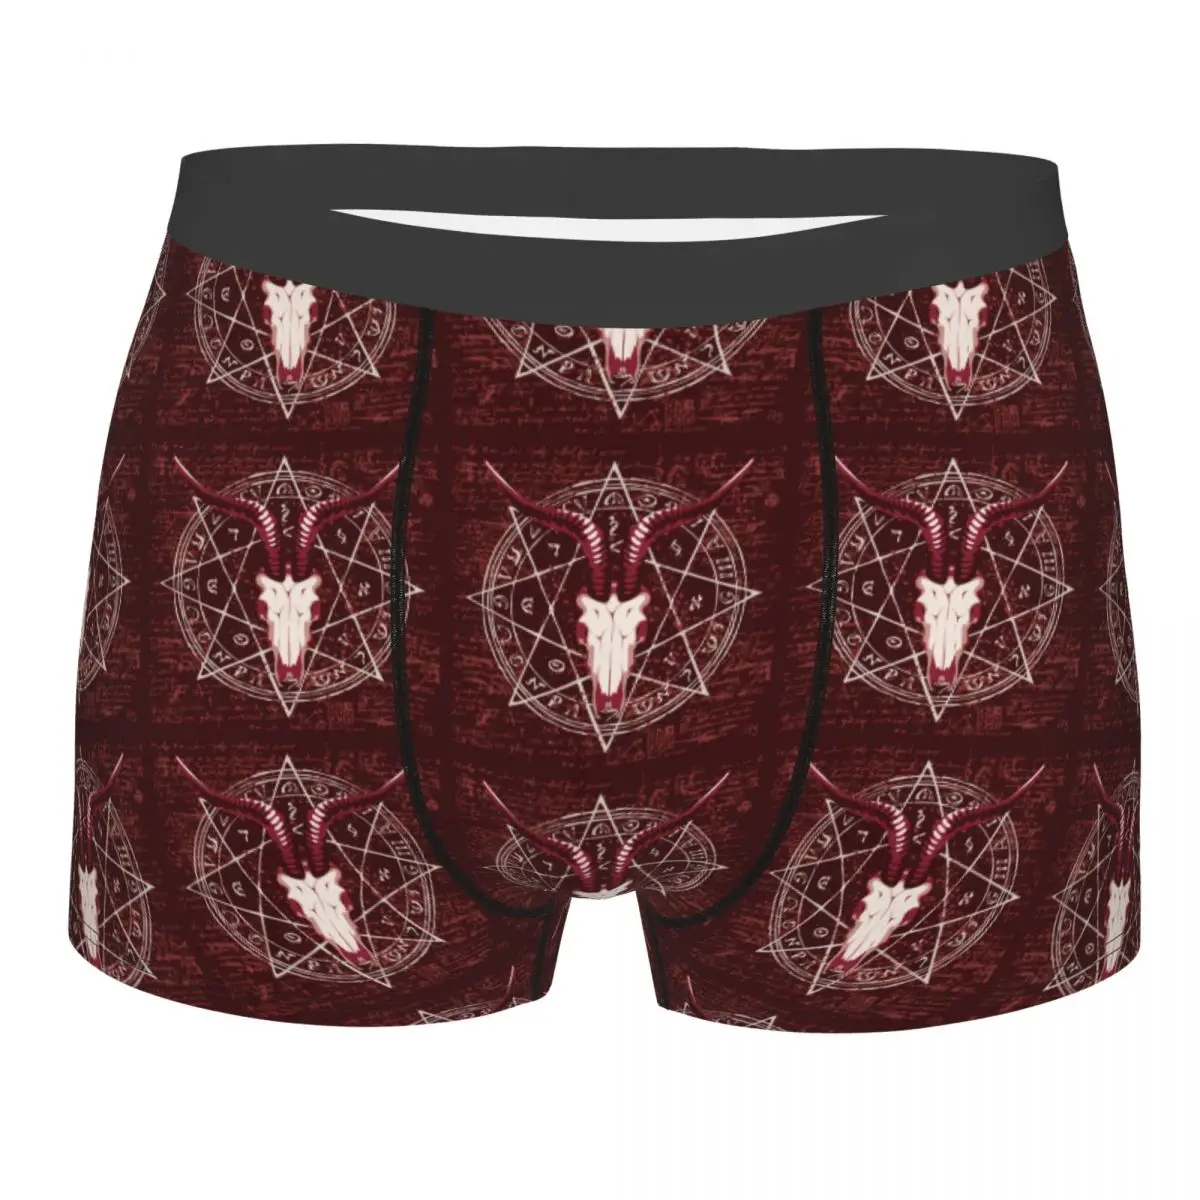 Men's Panties Underpants Boxers Underwear Goat Skull And Pentagram With Magical Inscriptions And Symbols Sexy Male Shorts